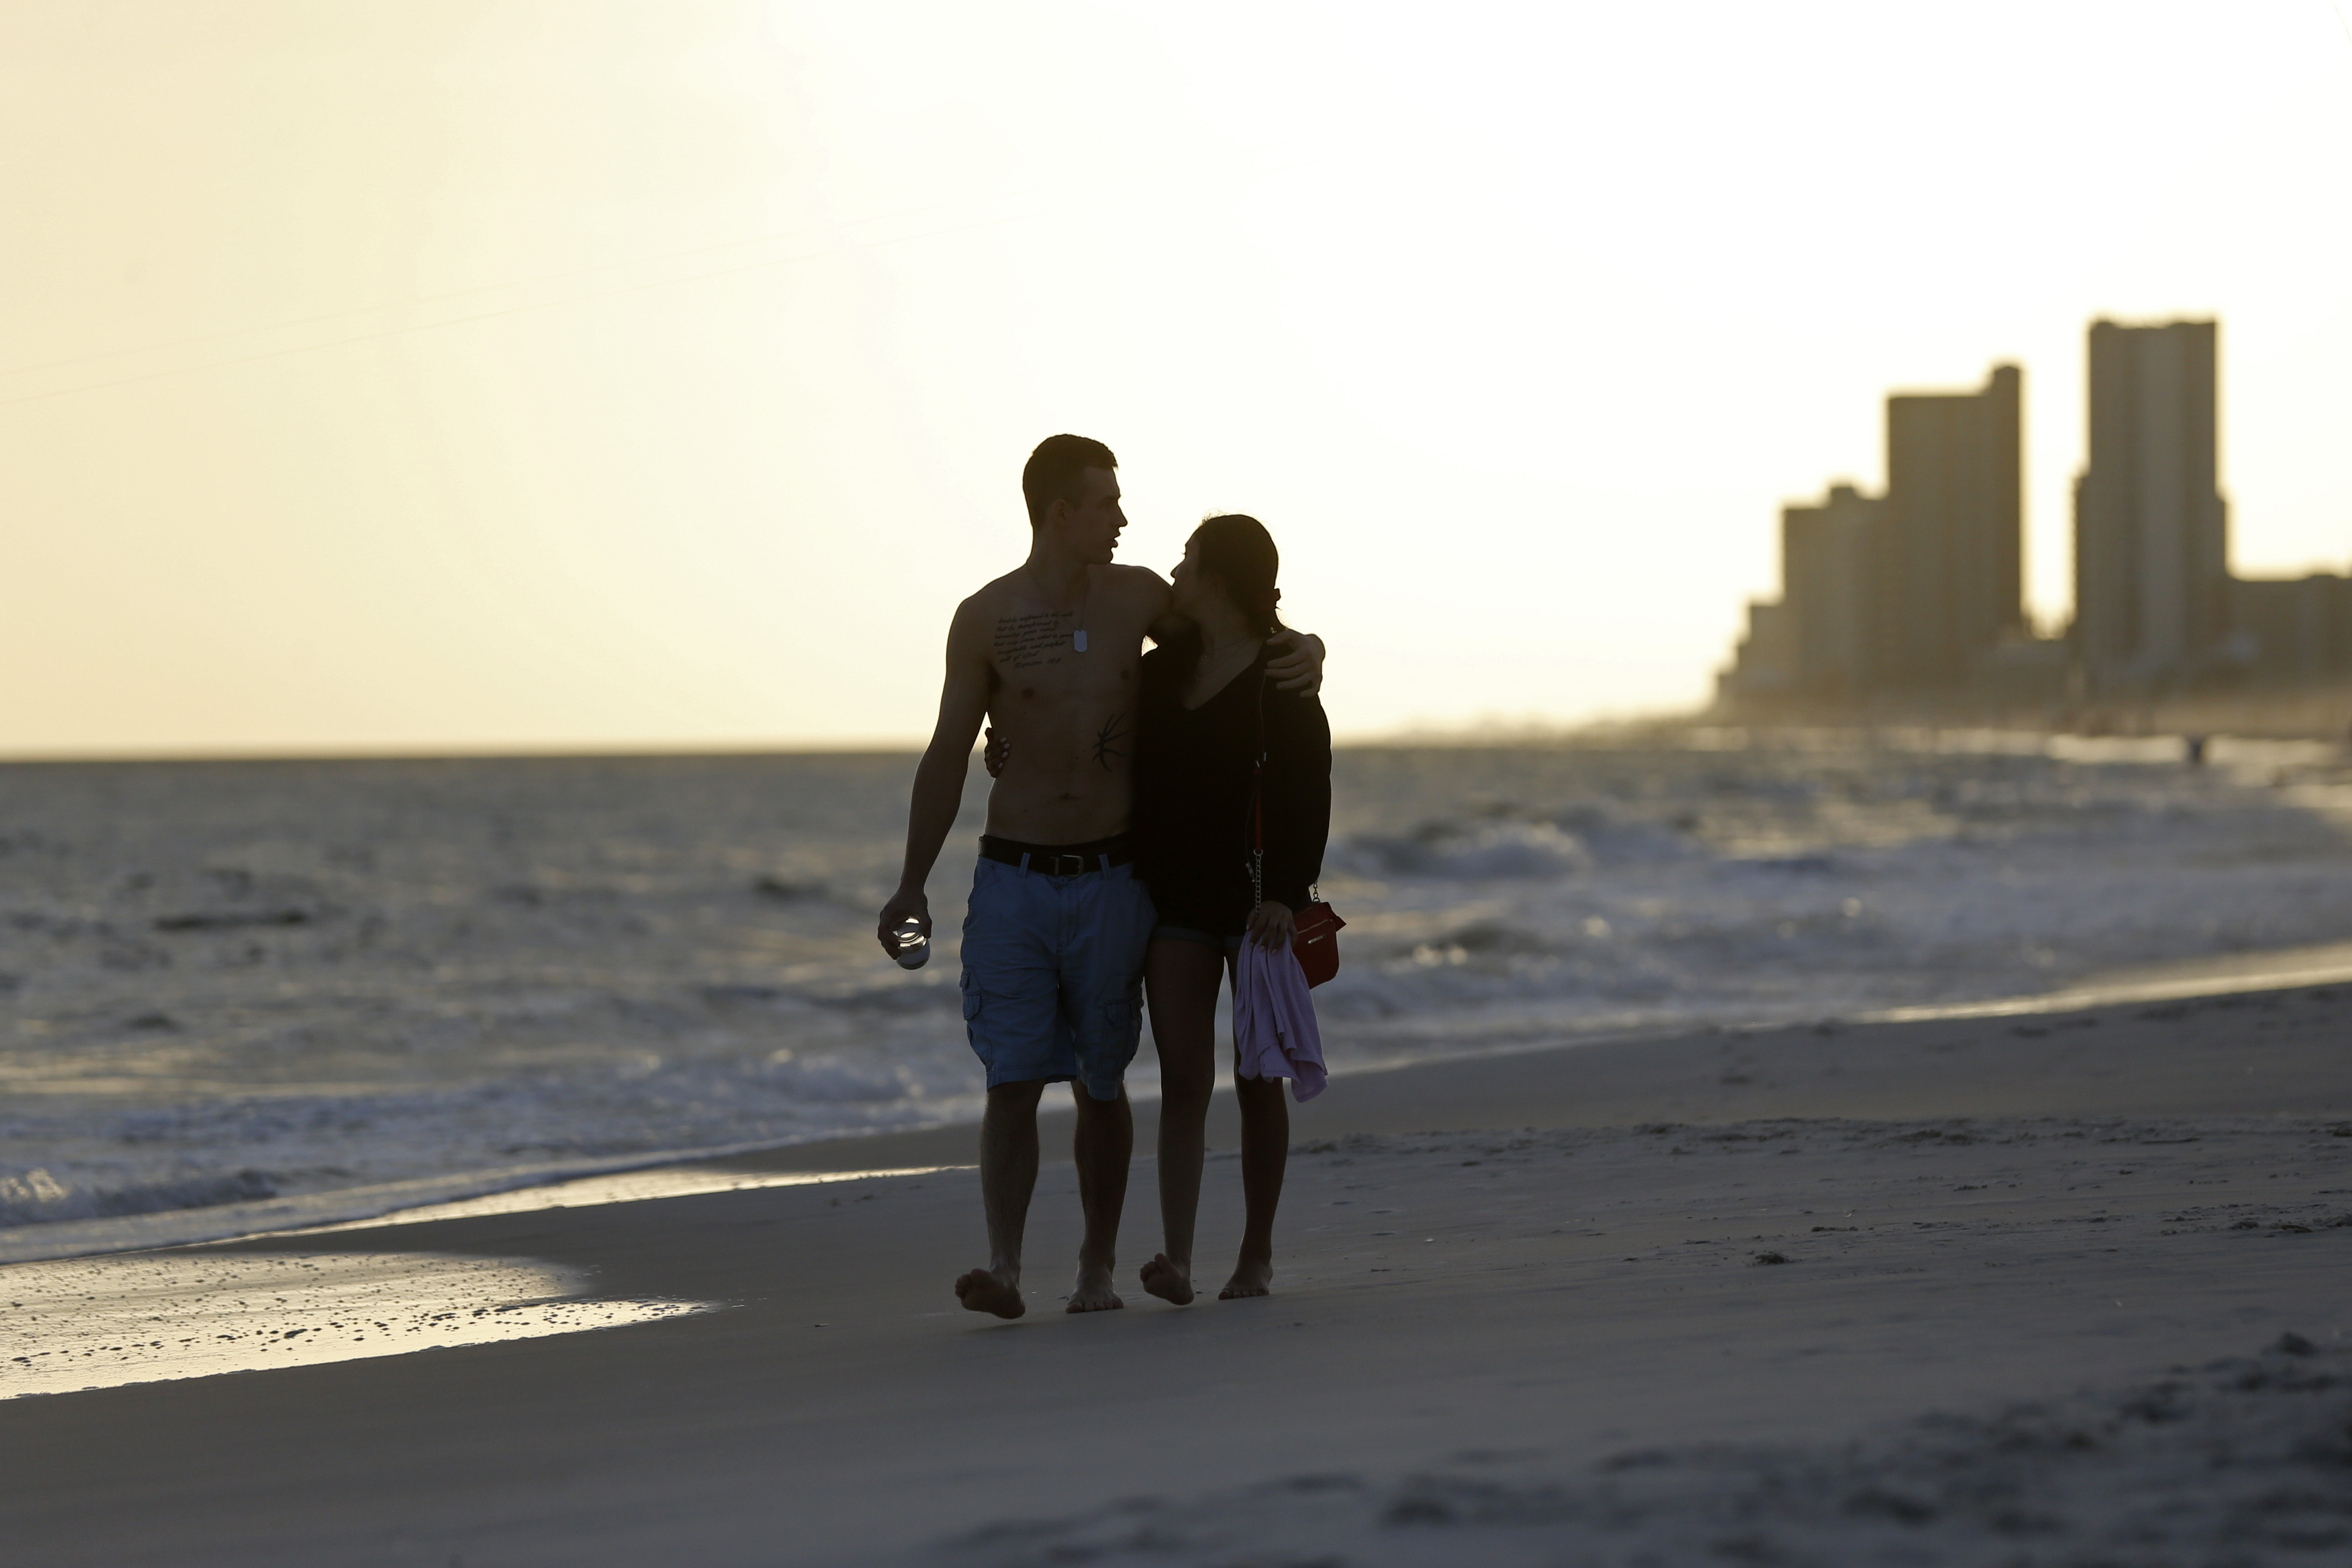 In this March 12, 2020 photo, people walk on the beach in Gulf Shores, Ala. The spring of coronavirus feels a lot like the summer of oil to residents along the Gulf Coast. Bars and restaurants are empty in Florida because of an invisible threat nearly a decade after the BP oil spill ravaged the region from the ocean floor up.